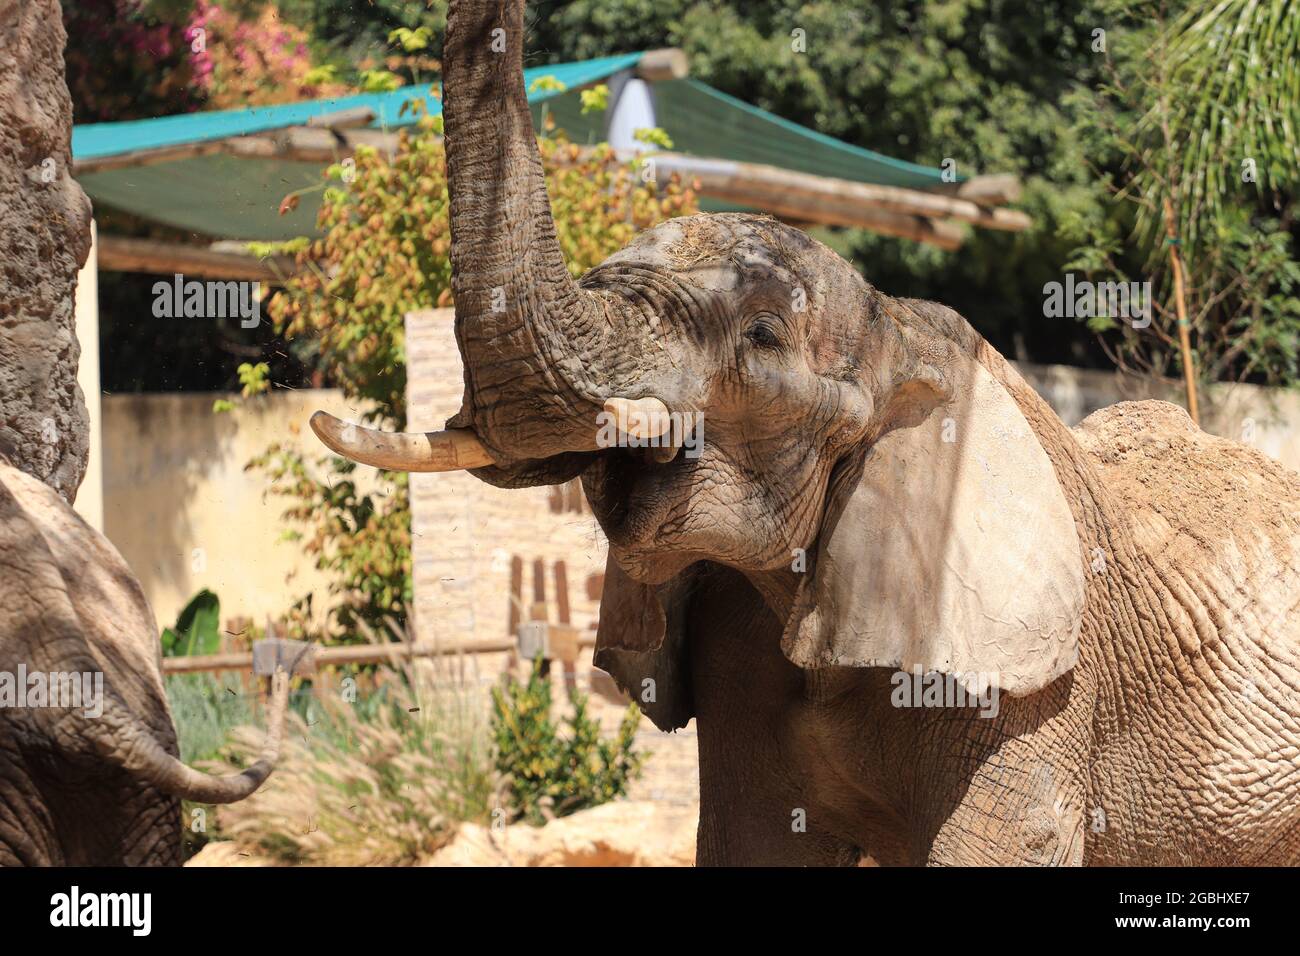 African elephant behind a tree in the savannah Stock Photo